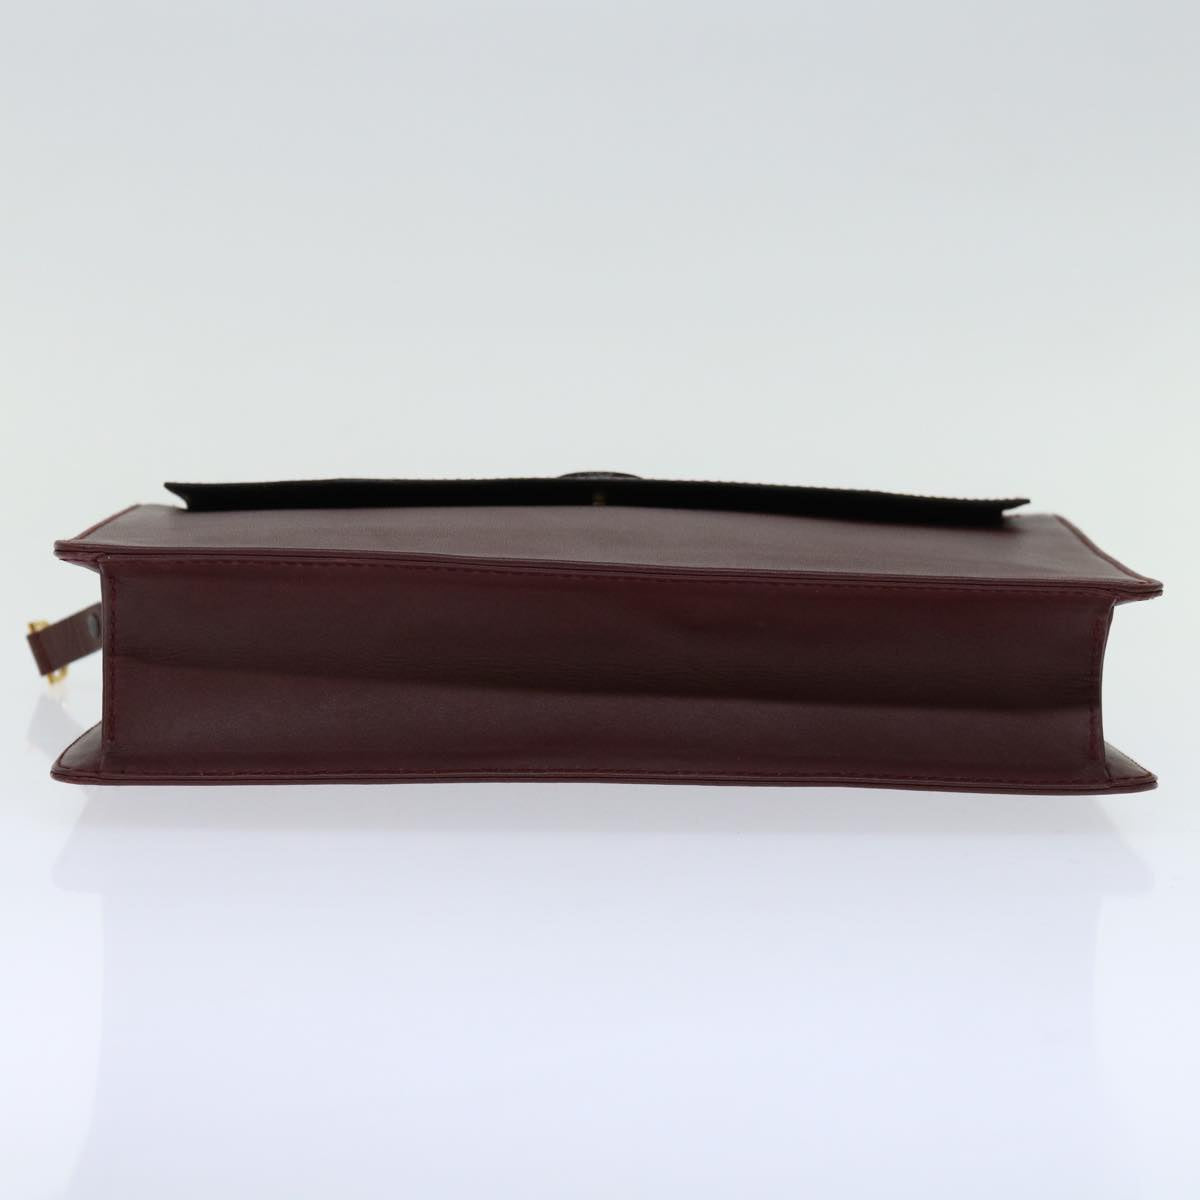 CARTIER Clutch Bag Leather Wine Red Auth 68226